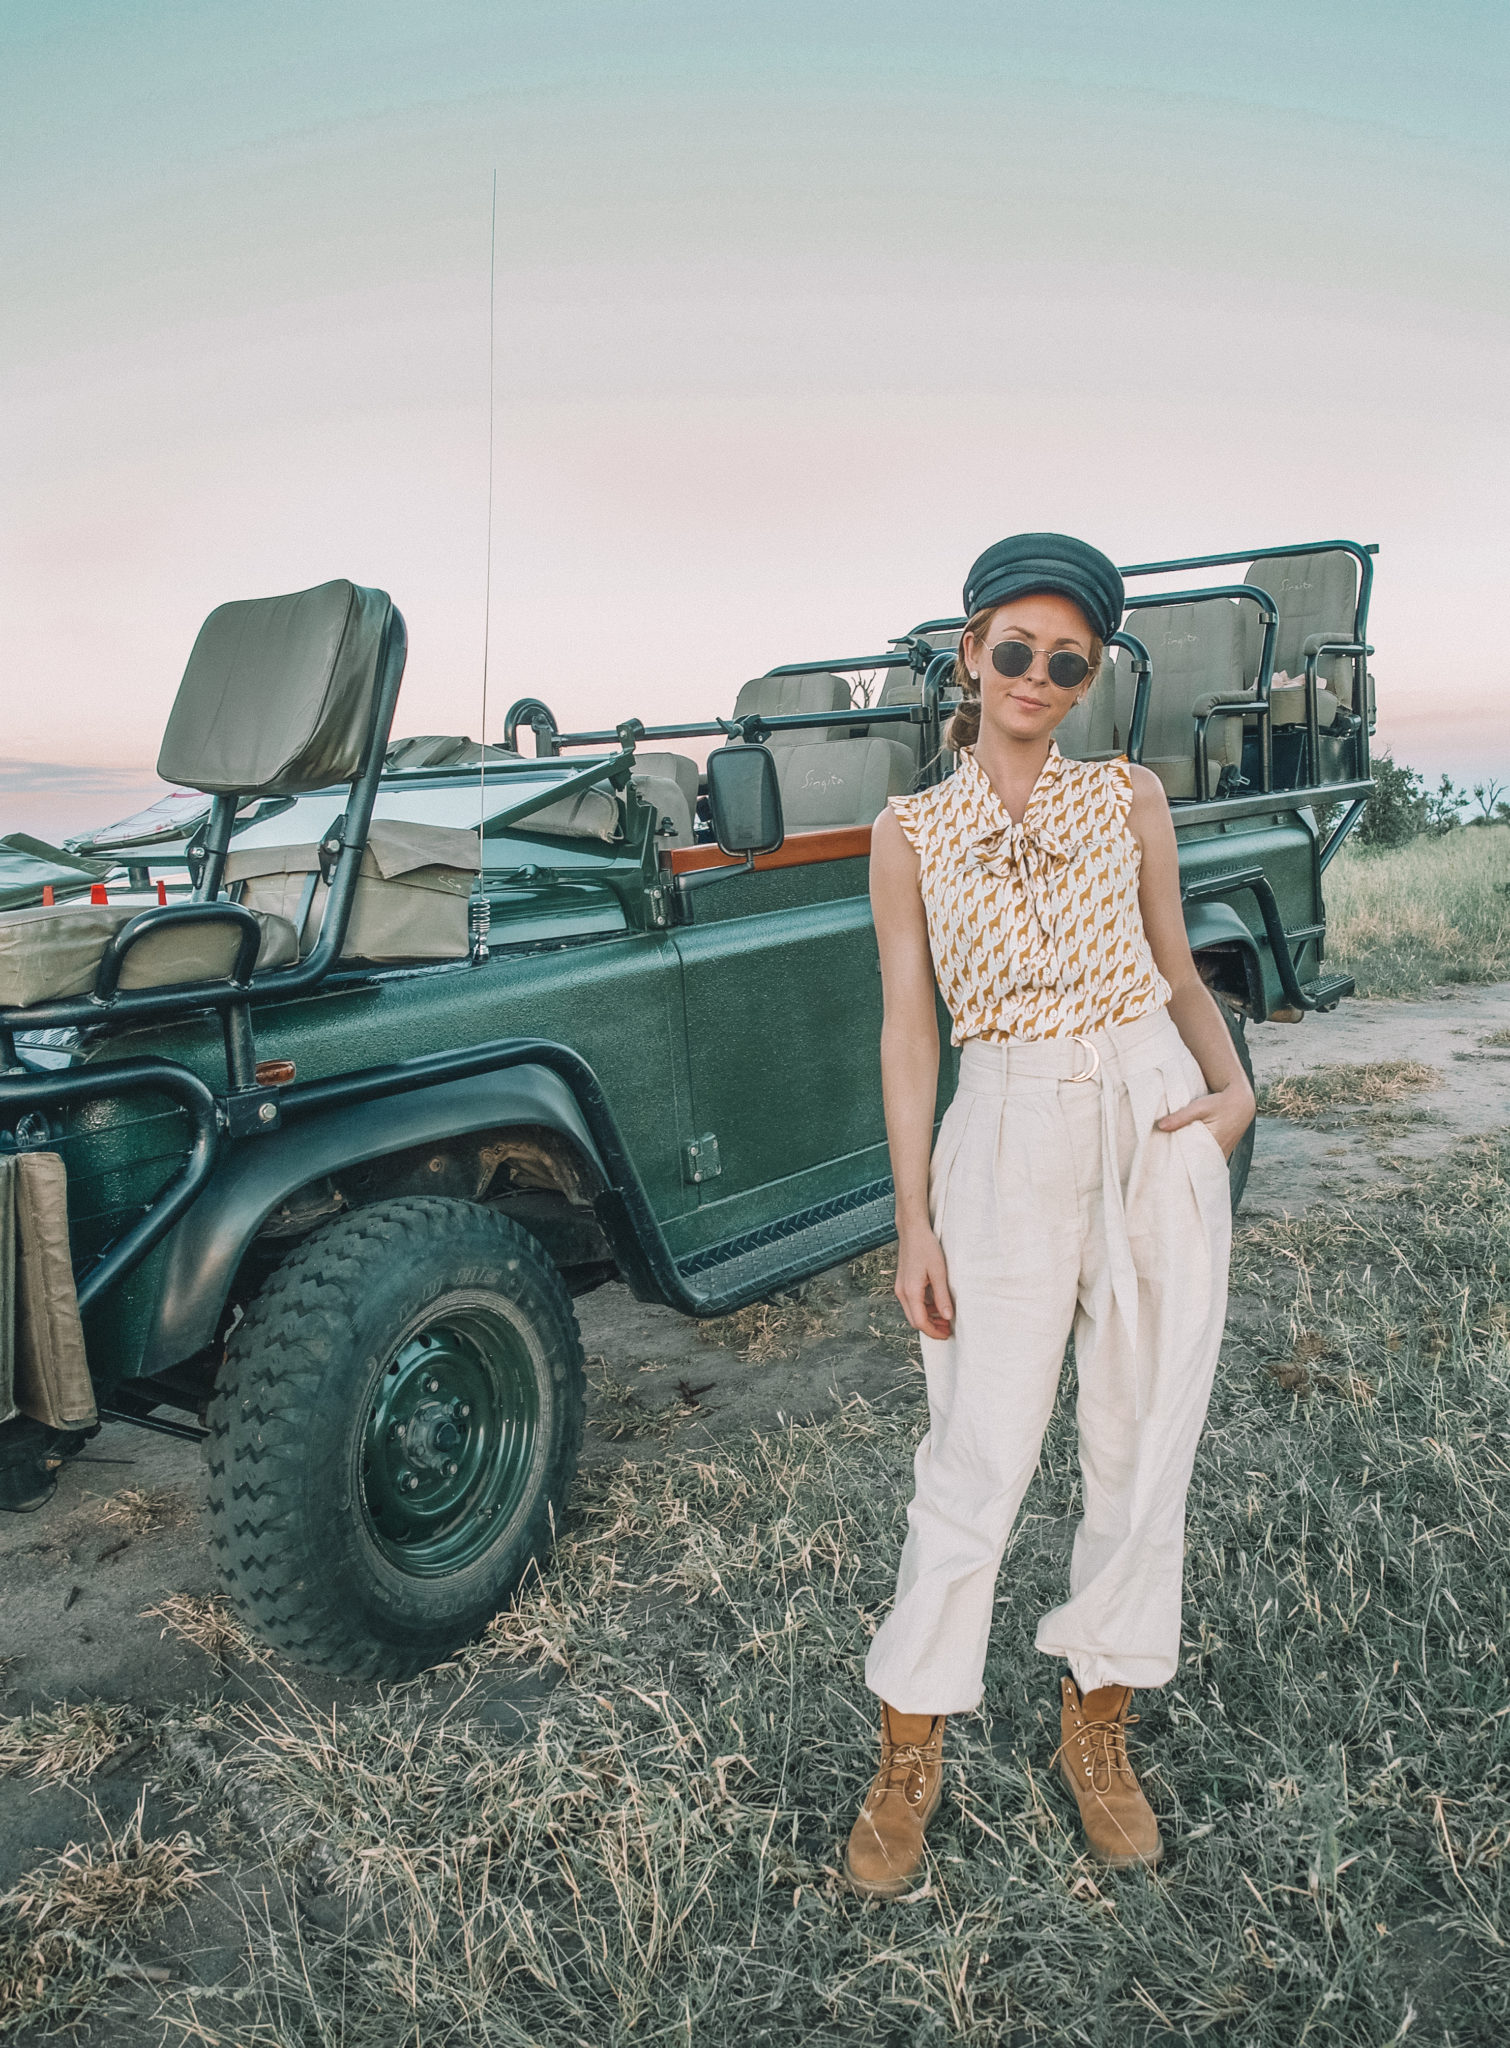 What to Pack for Safari: A complete Safari Packing Guide! - World